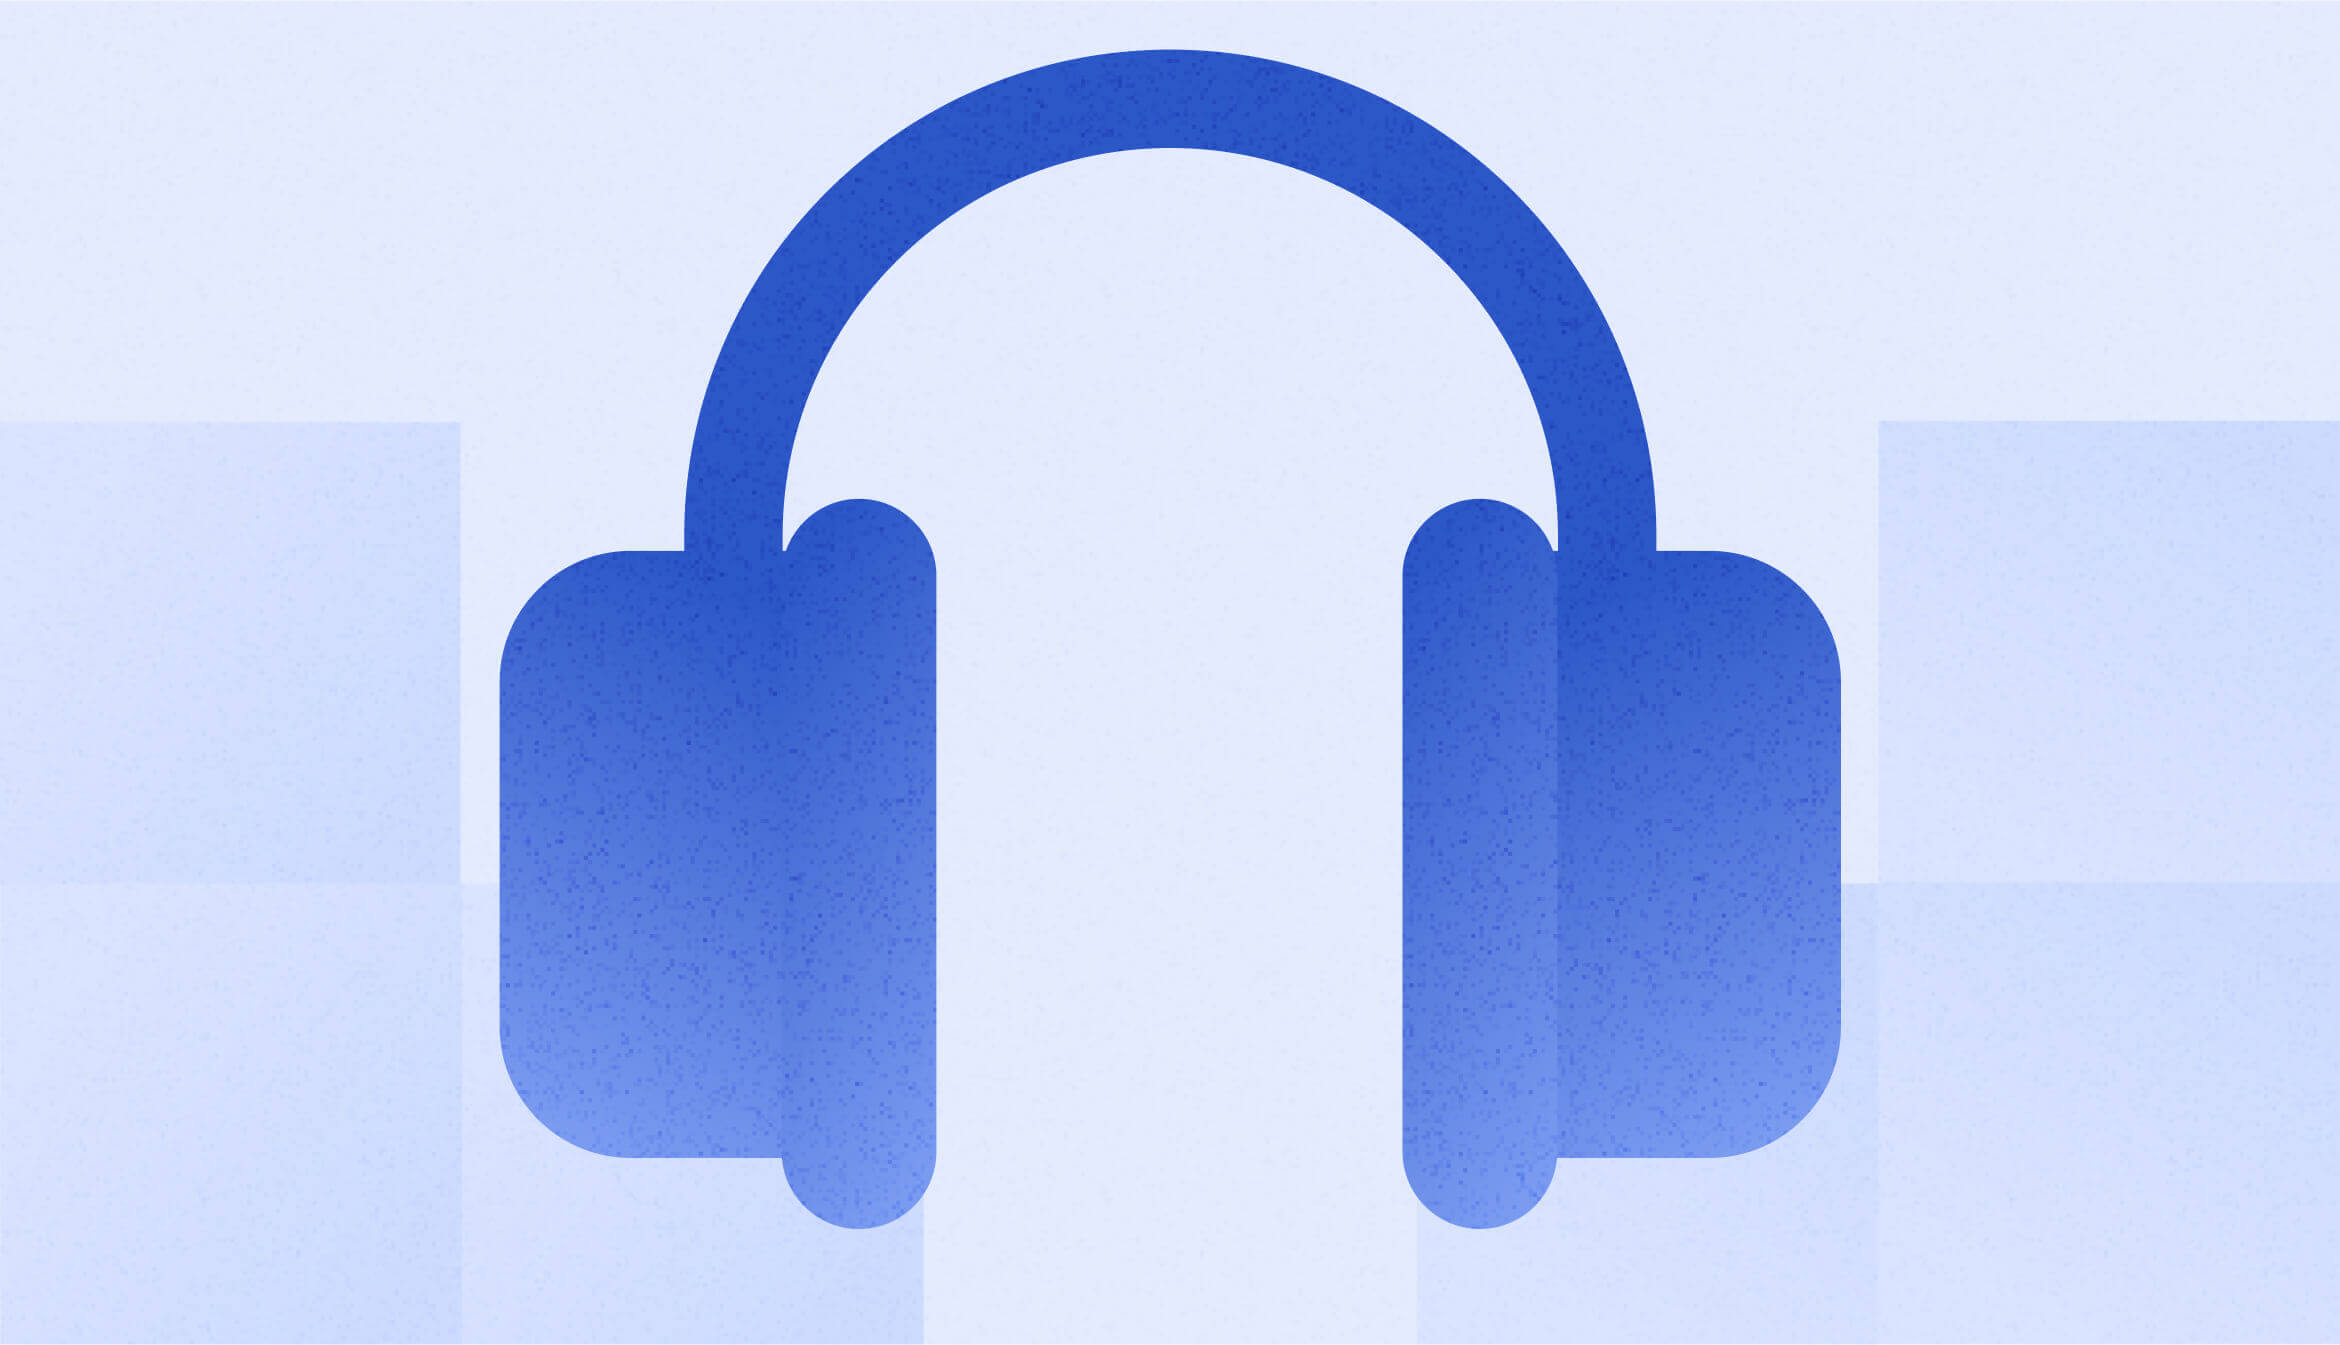 10 Best Financial Podcasts of 2022